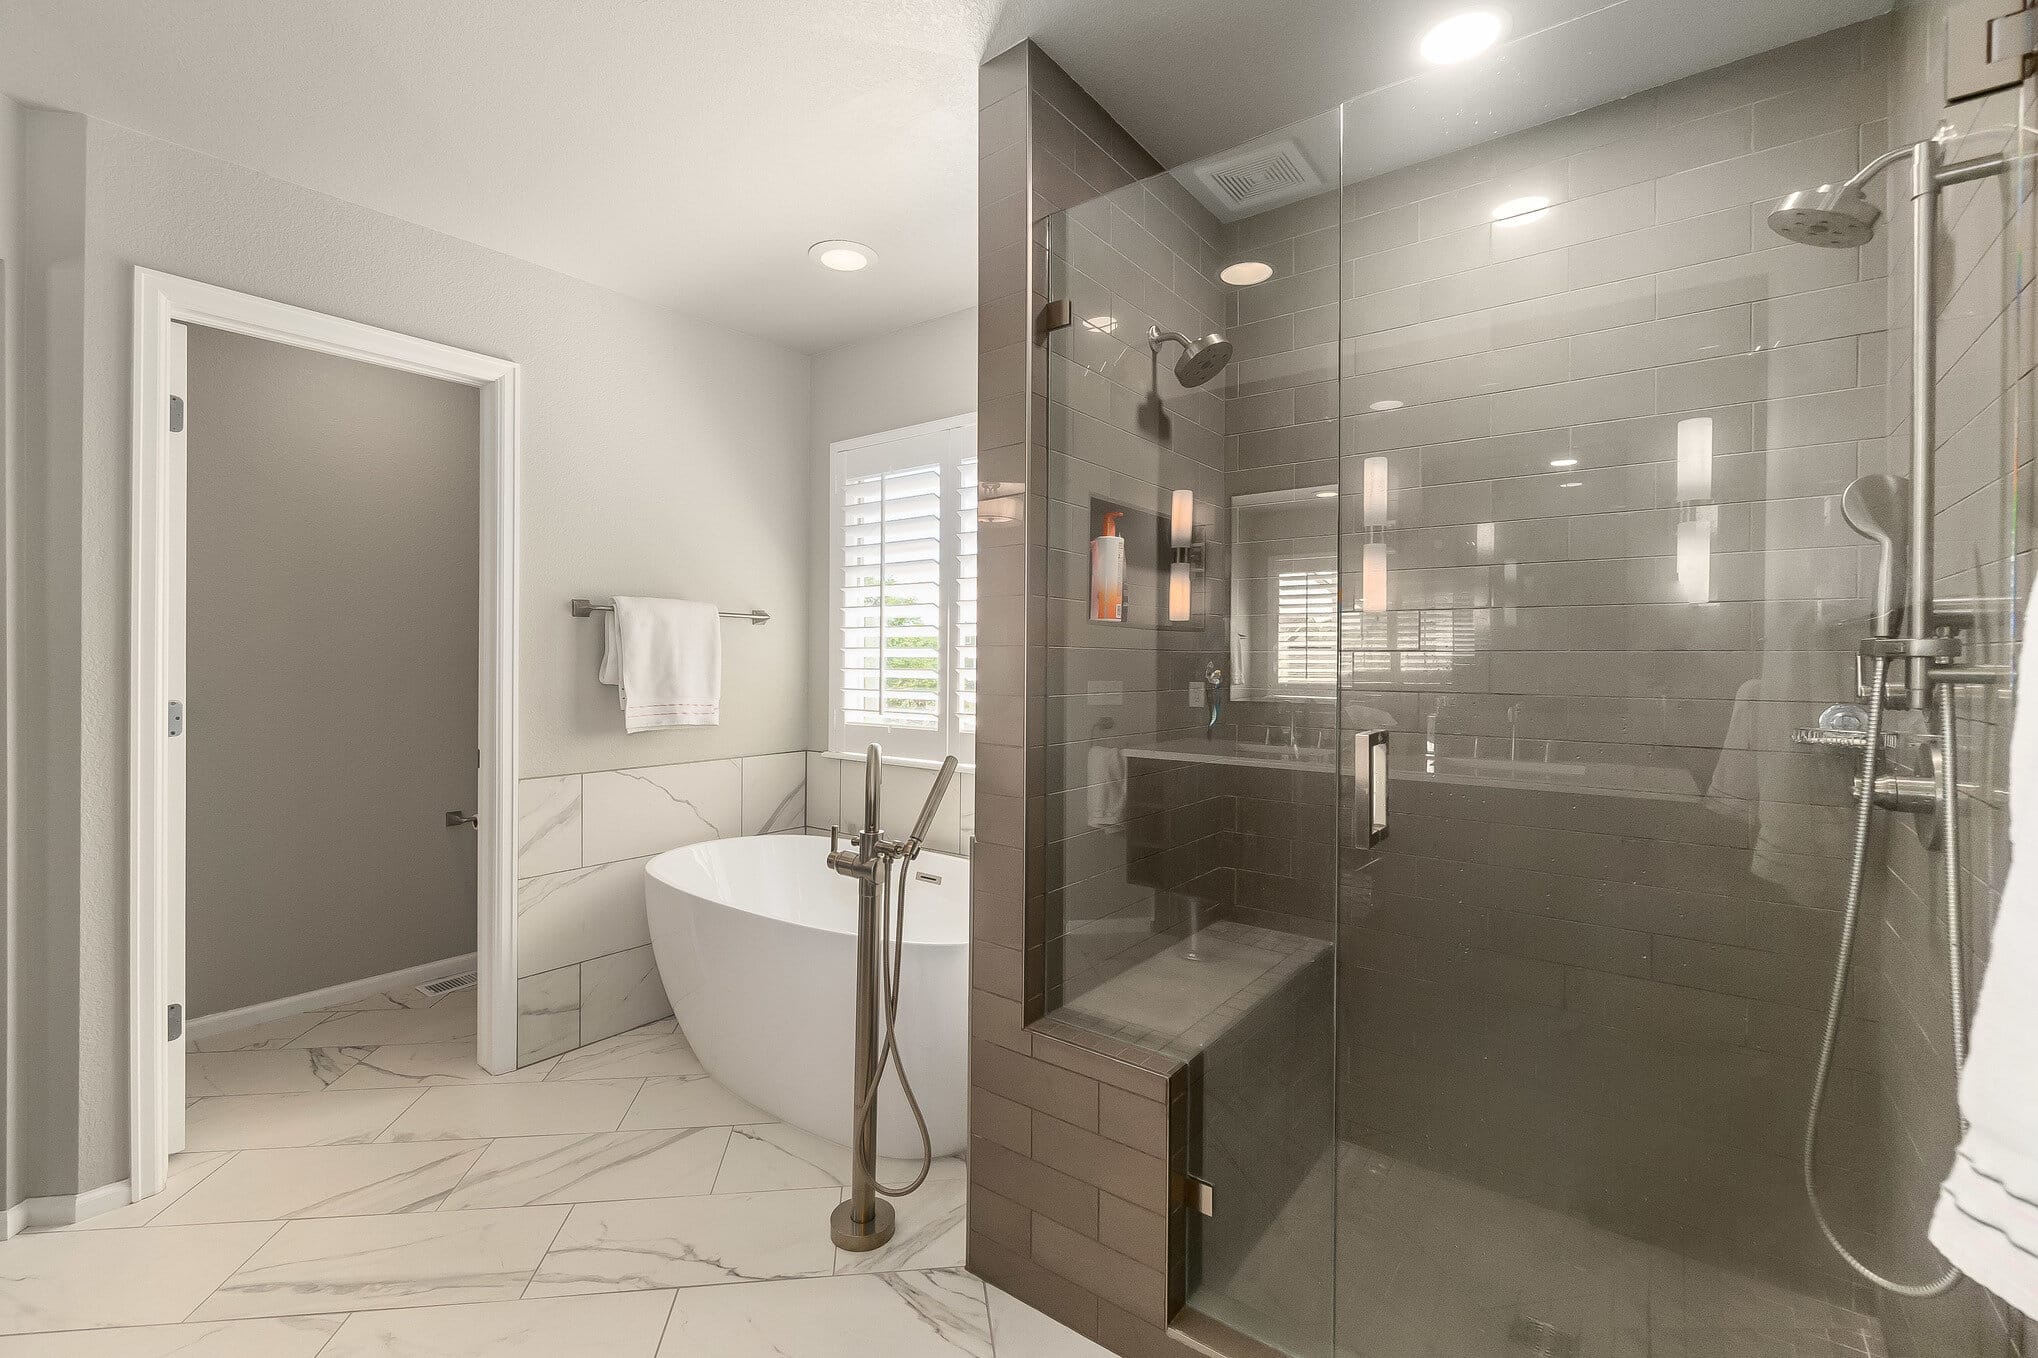 Large walk-in shower with dark tile and separate white tub on marble floor